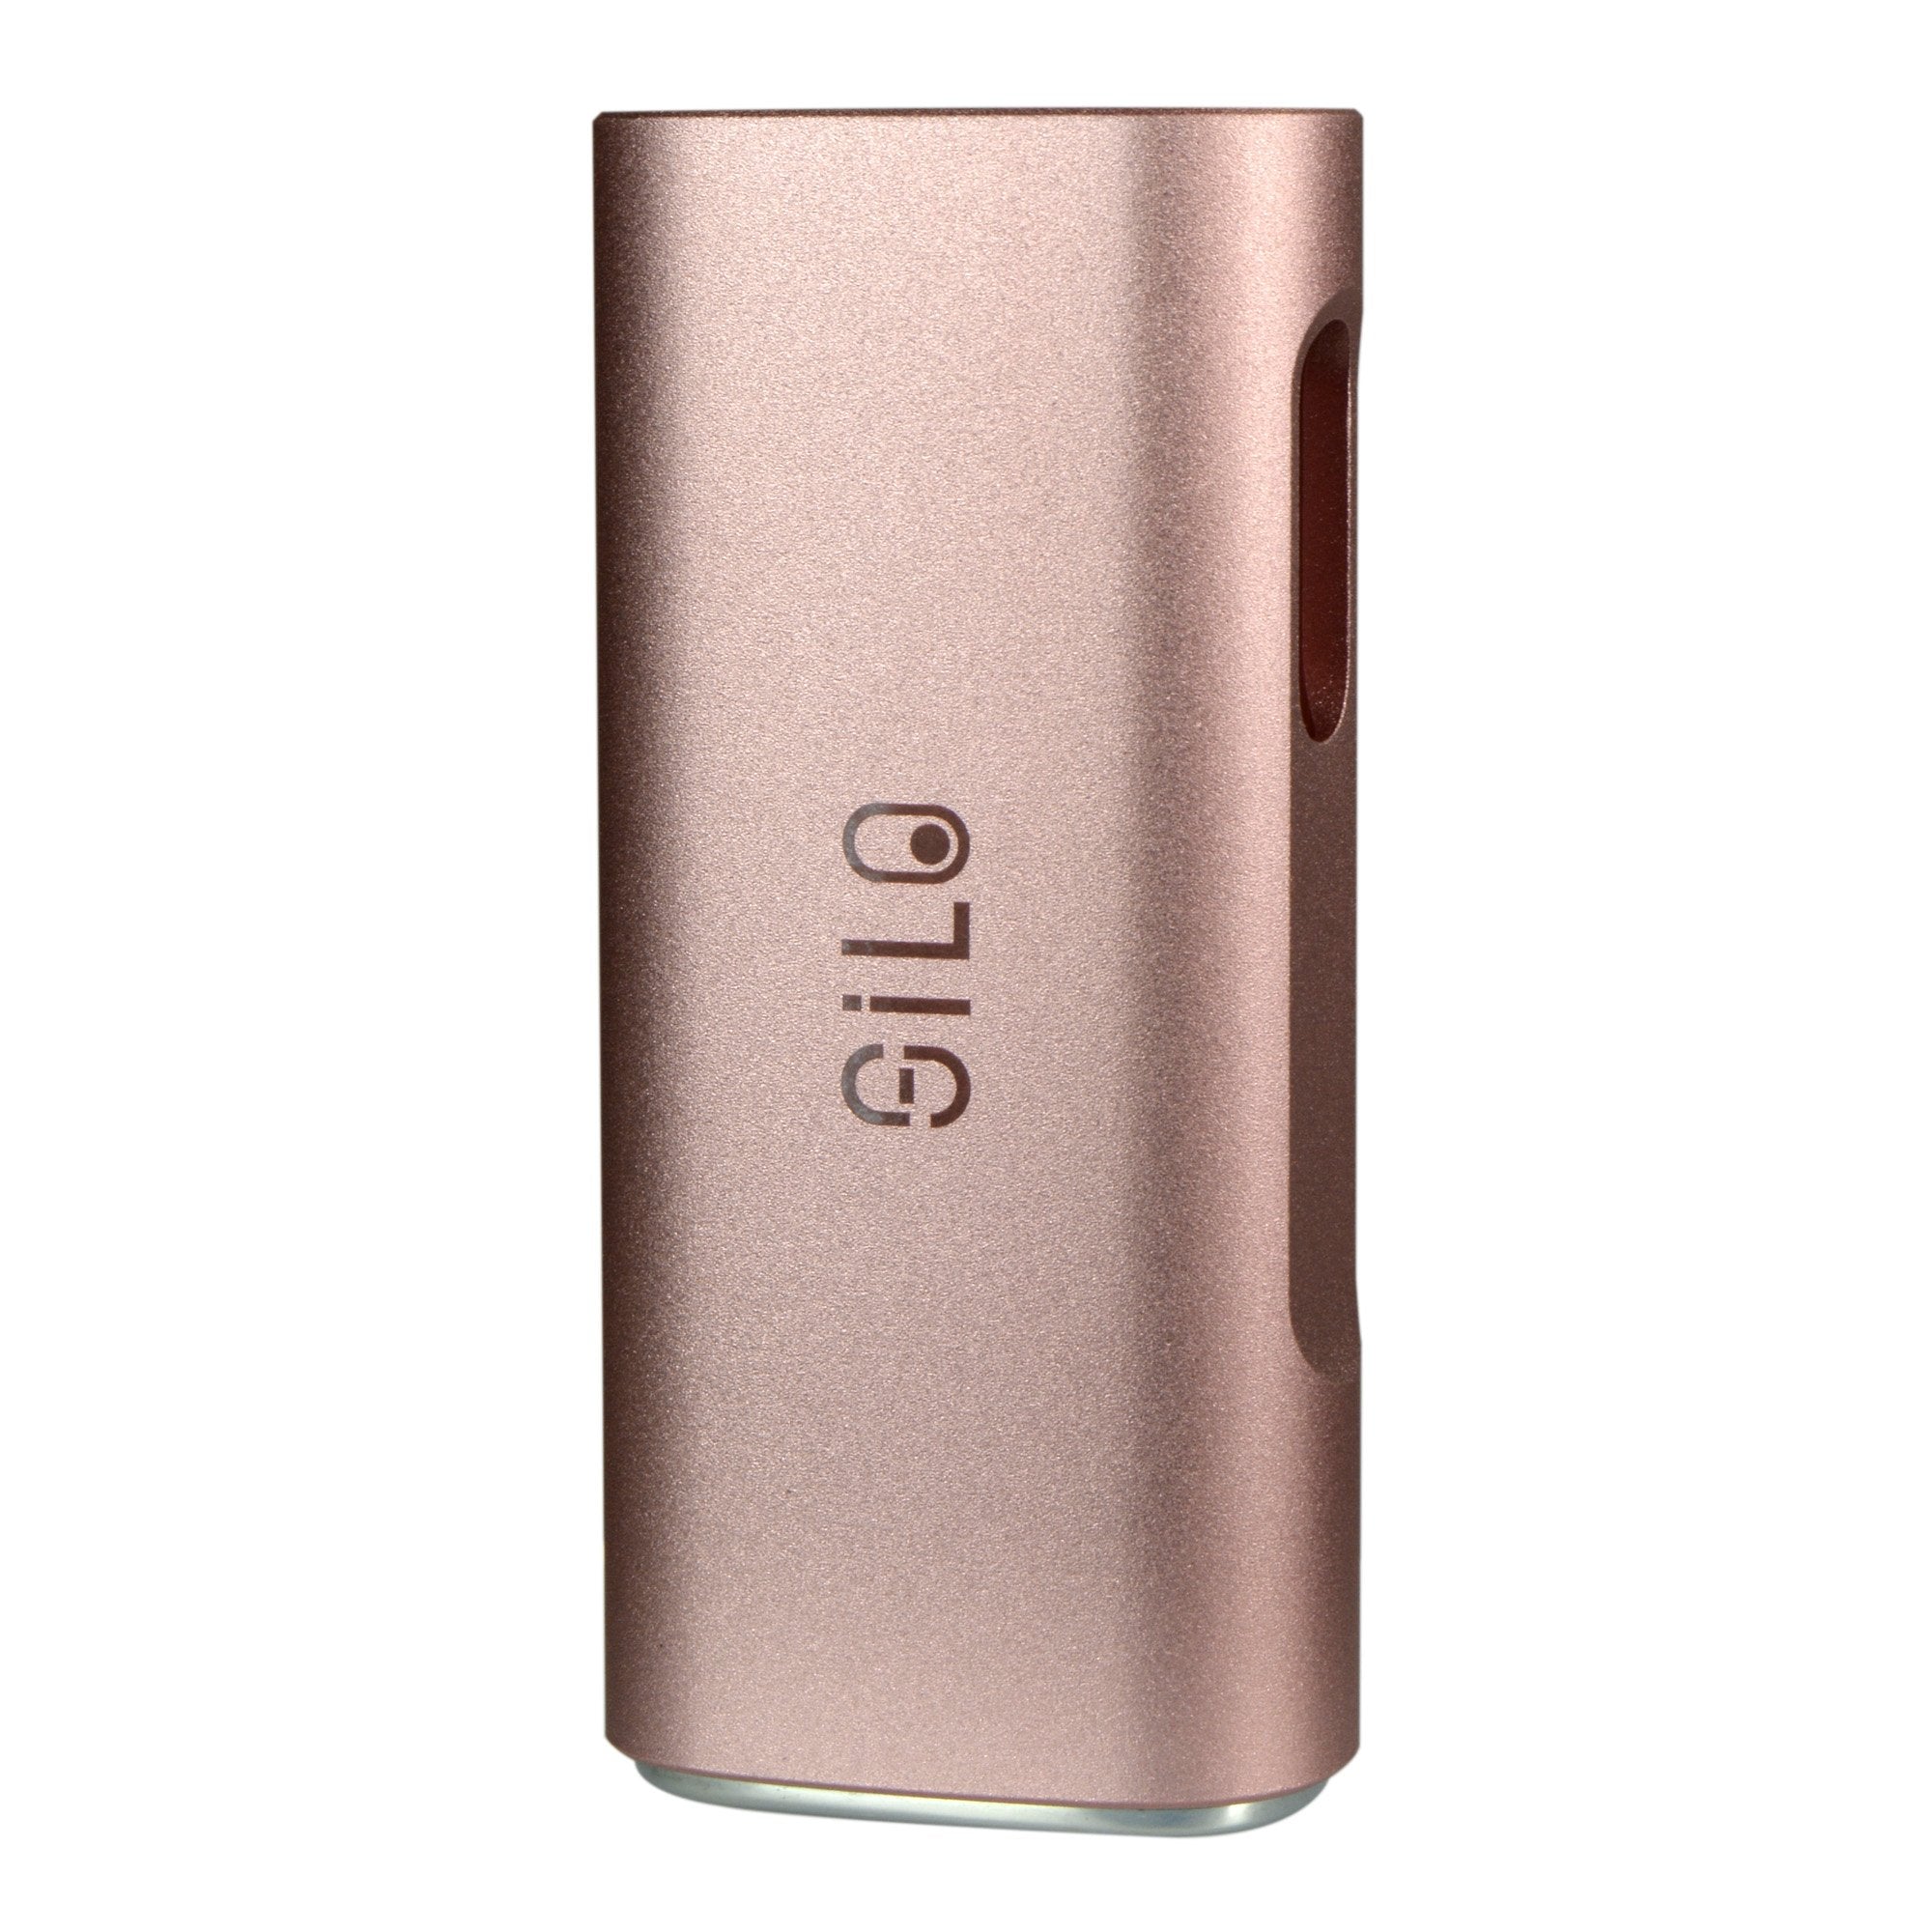 CCELL | Silo Vape Battery with USB Charger | 500mAh - Rose - 510 Thread - 3